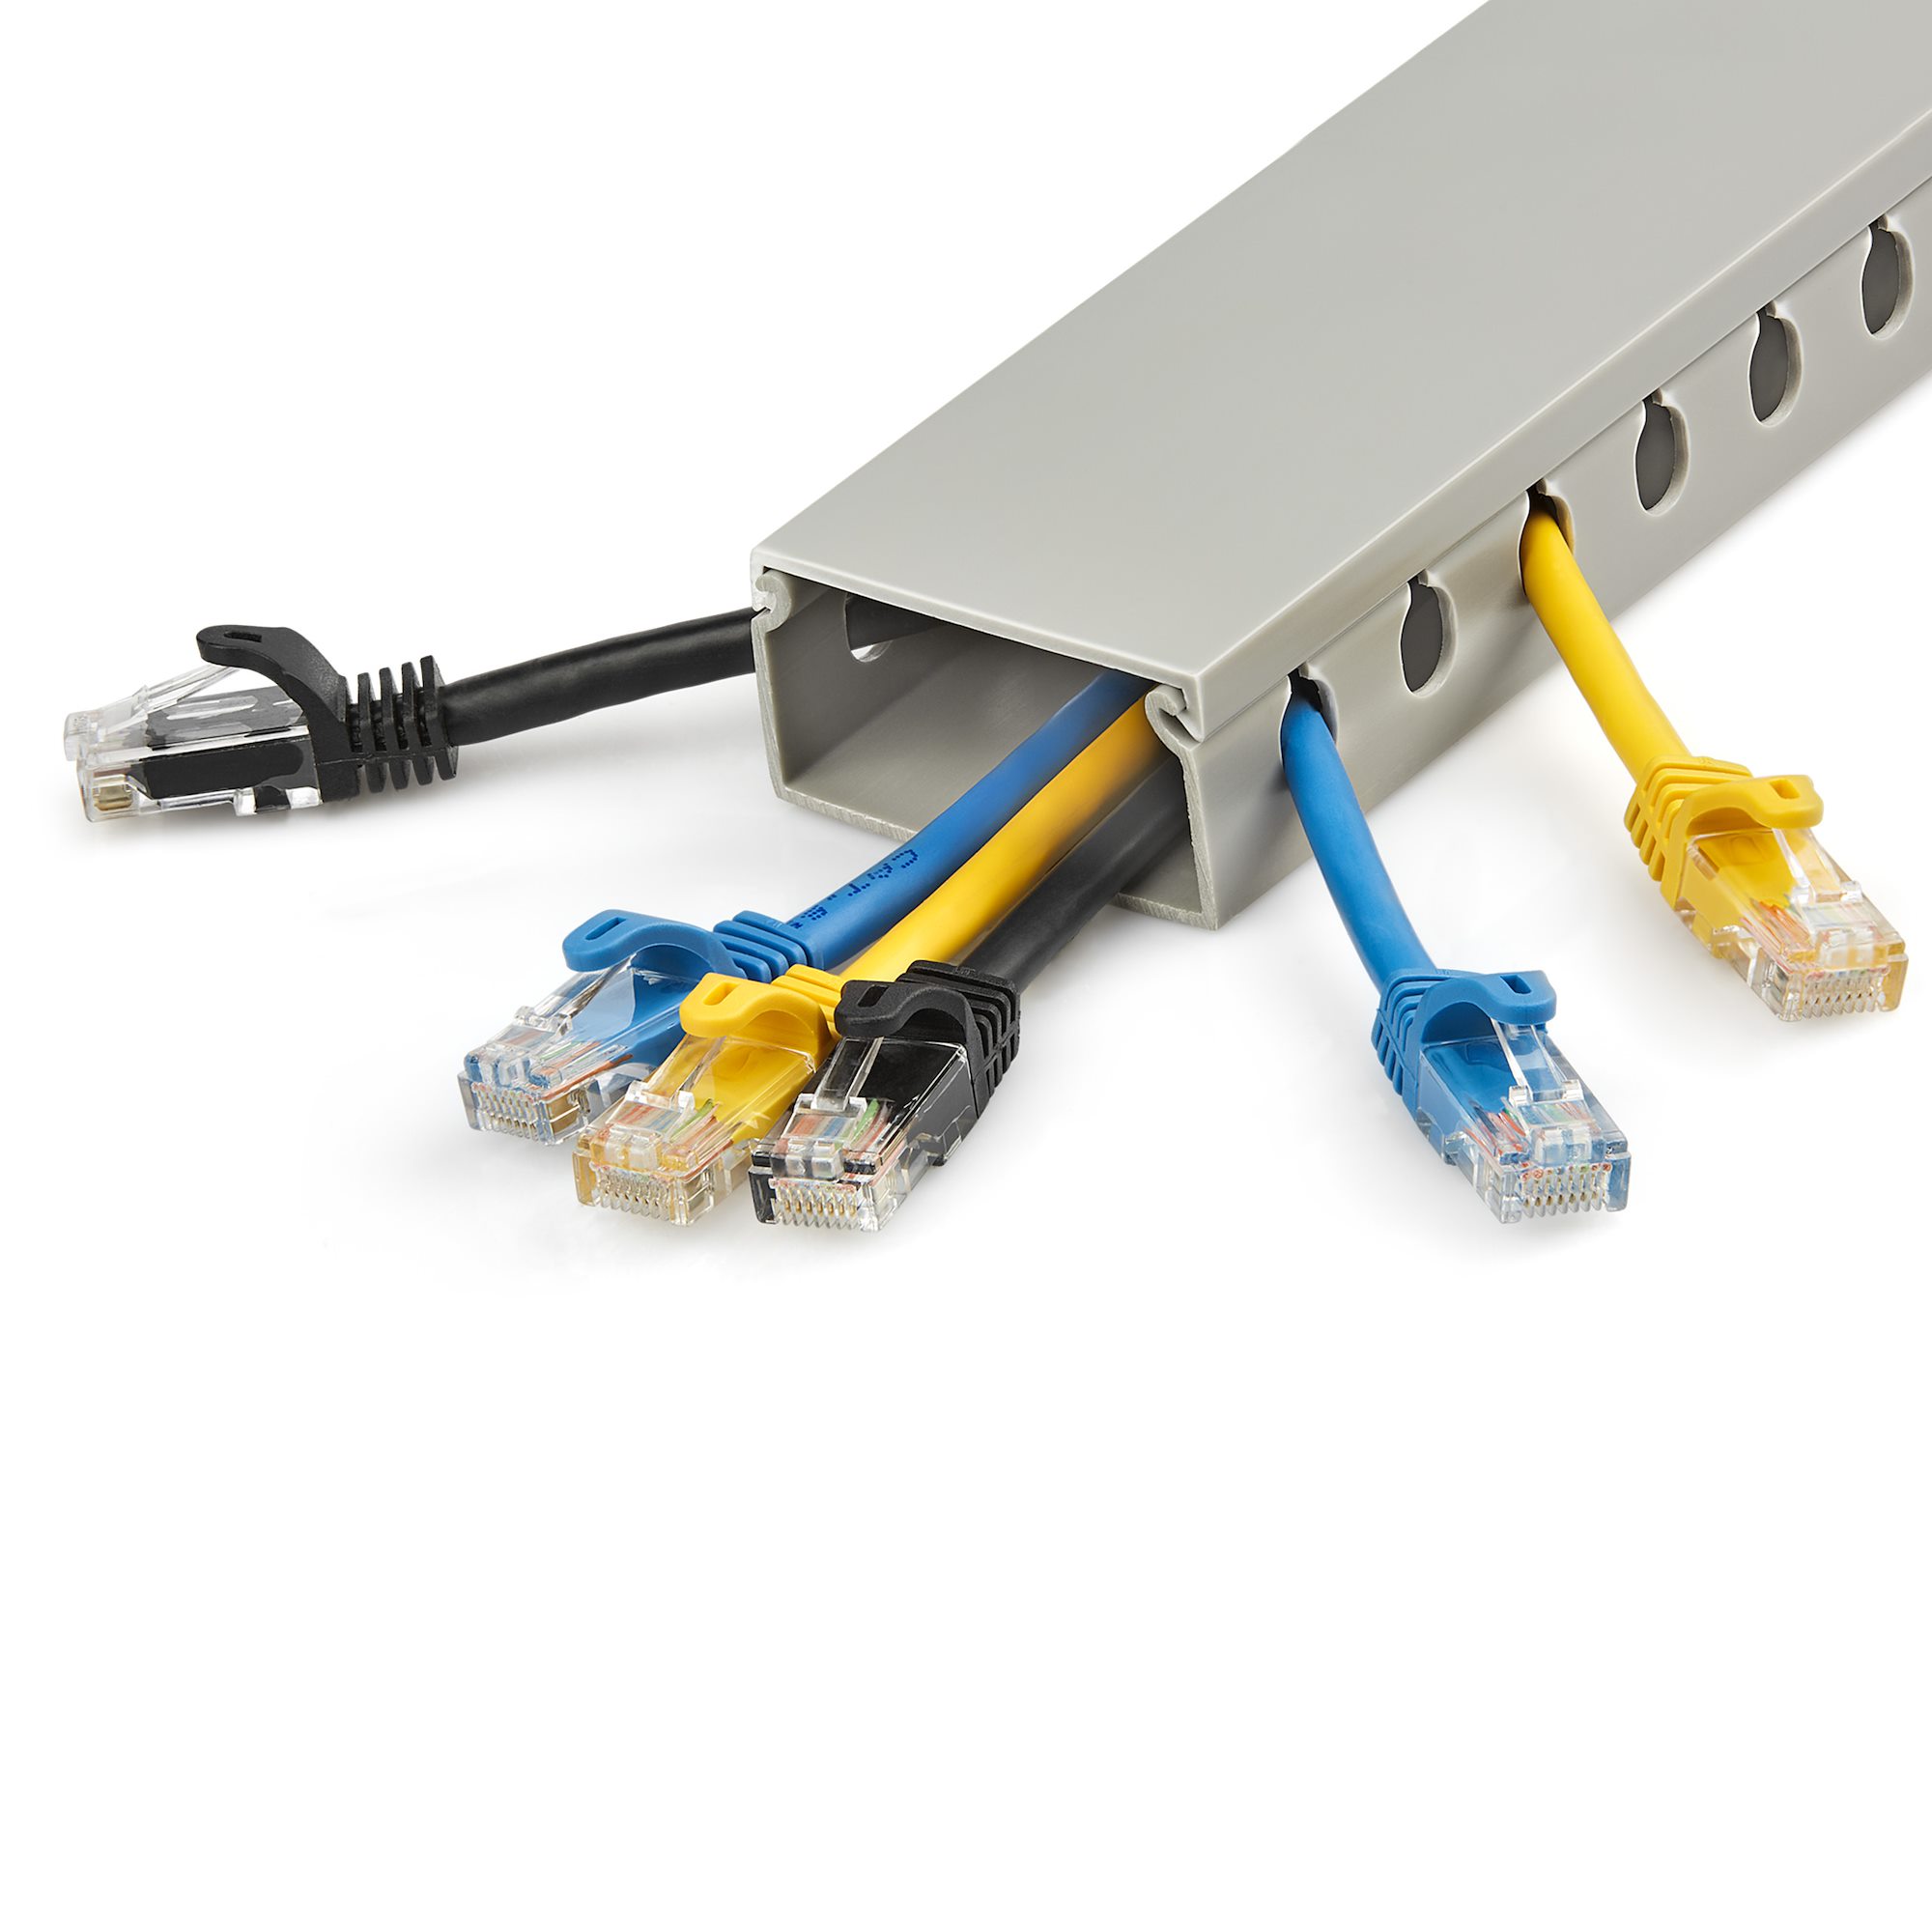 6.5' Cable Management Raceway, 3 Channel - Cable Routing Solutions